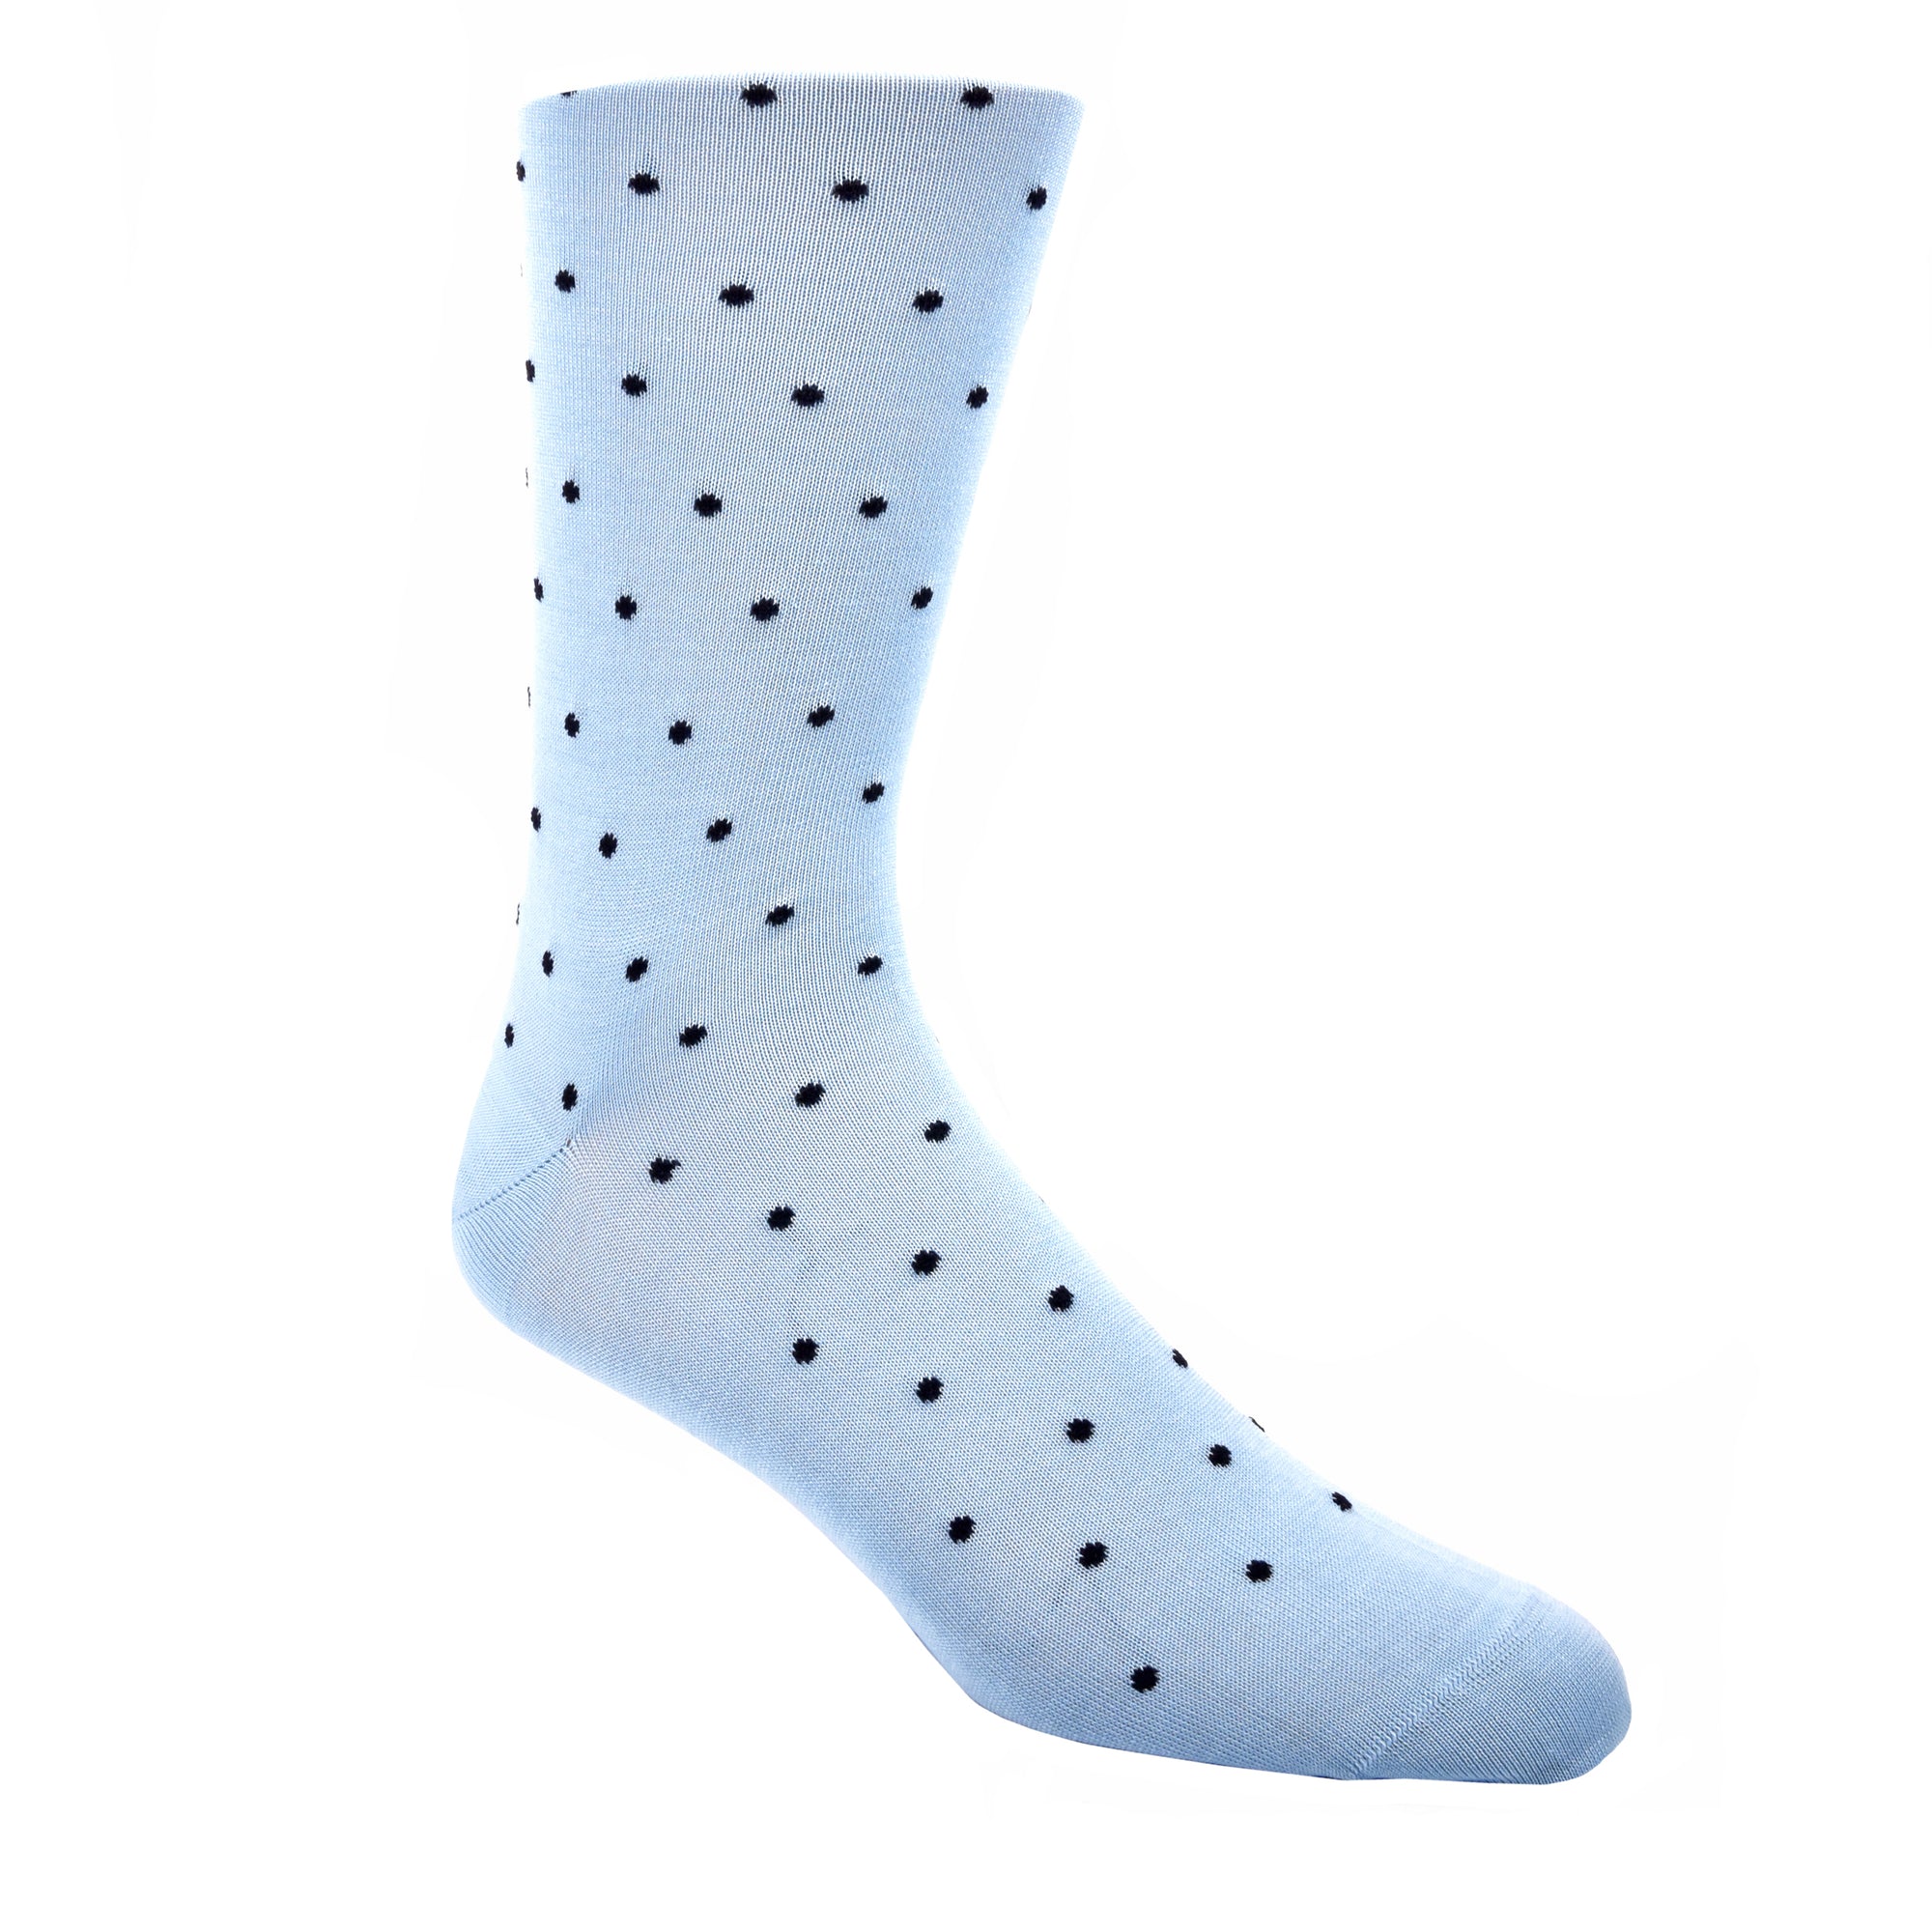 Dots on dots on dots. Life is too short to wear boring socks! #damnright  70% Mercerized Cotton 29% Nylon 1% Spandex Fits Size 8-12 Machine Washable Made in the USA